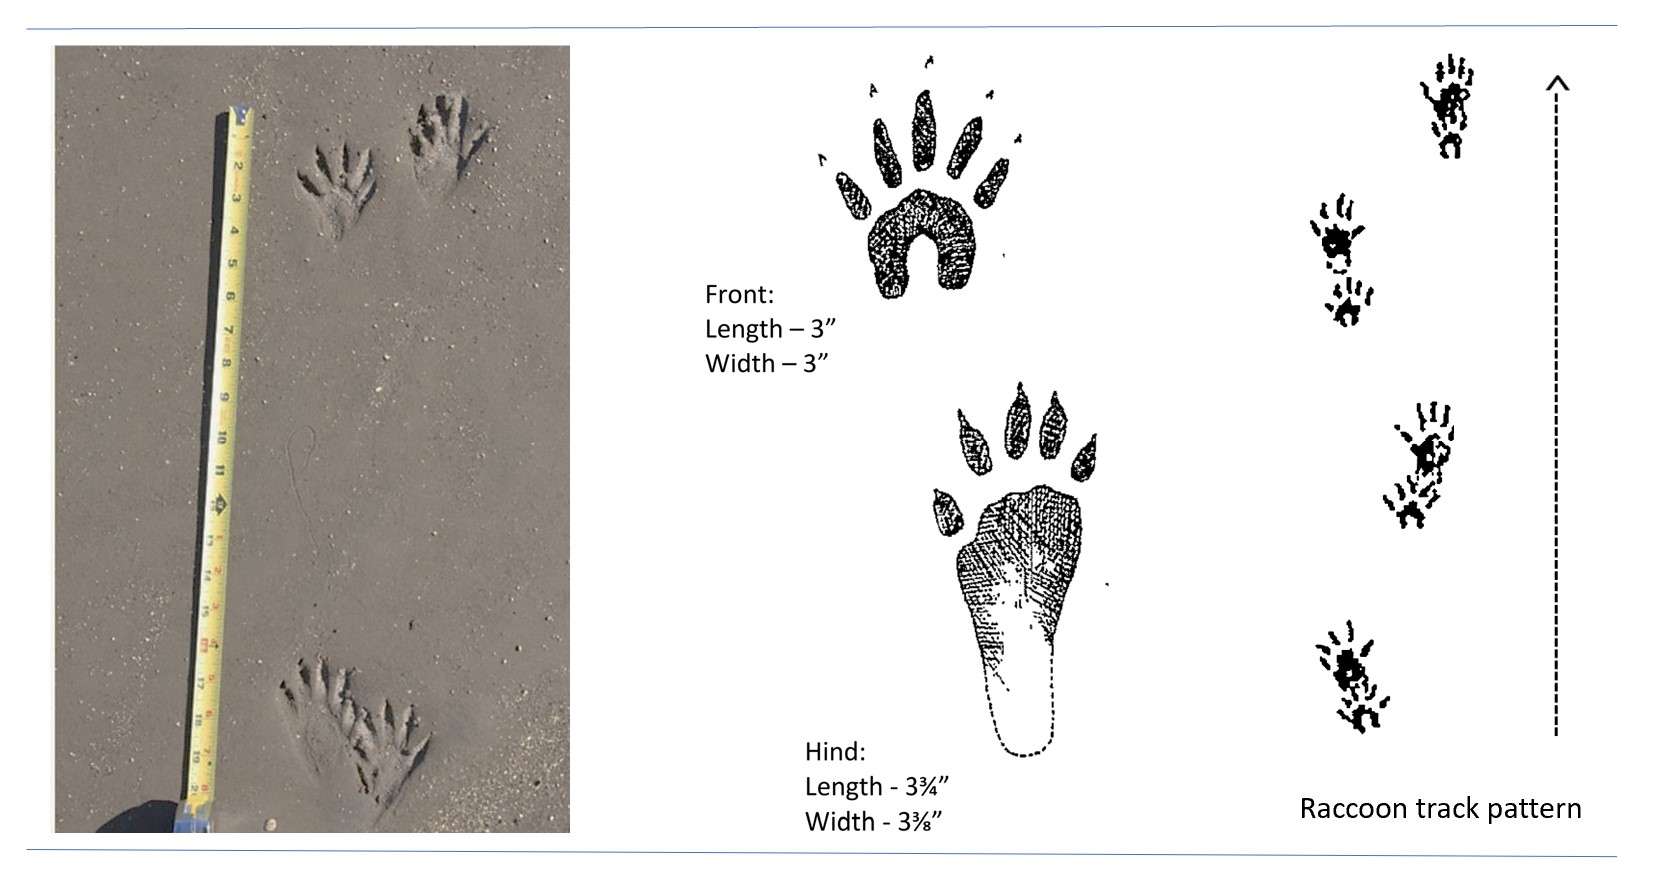 Photo and illustrated tracks of a raccoon.